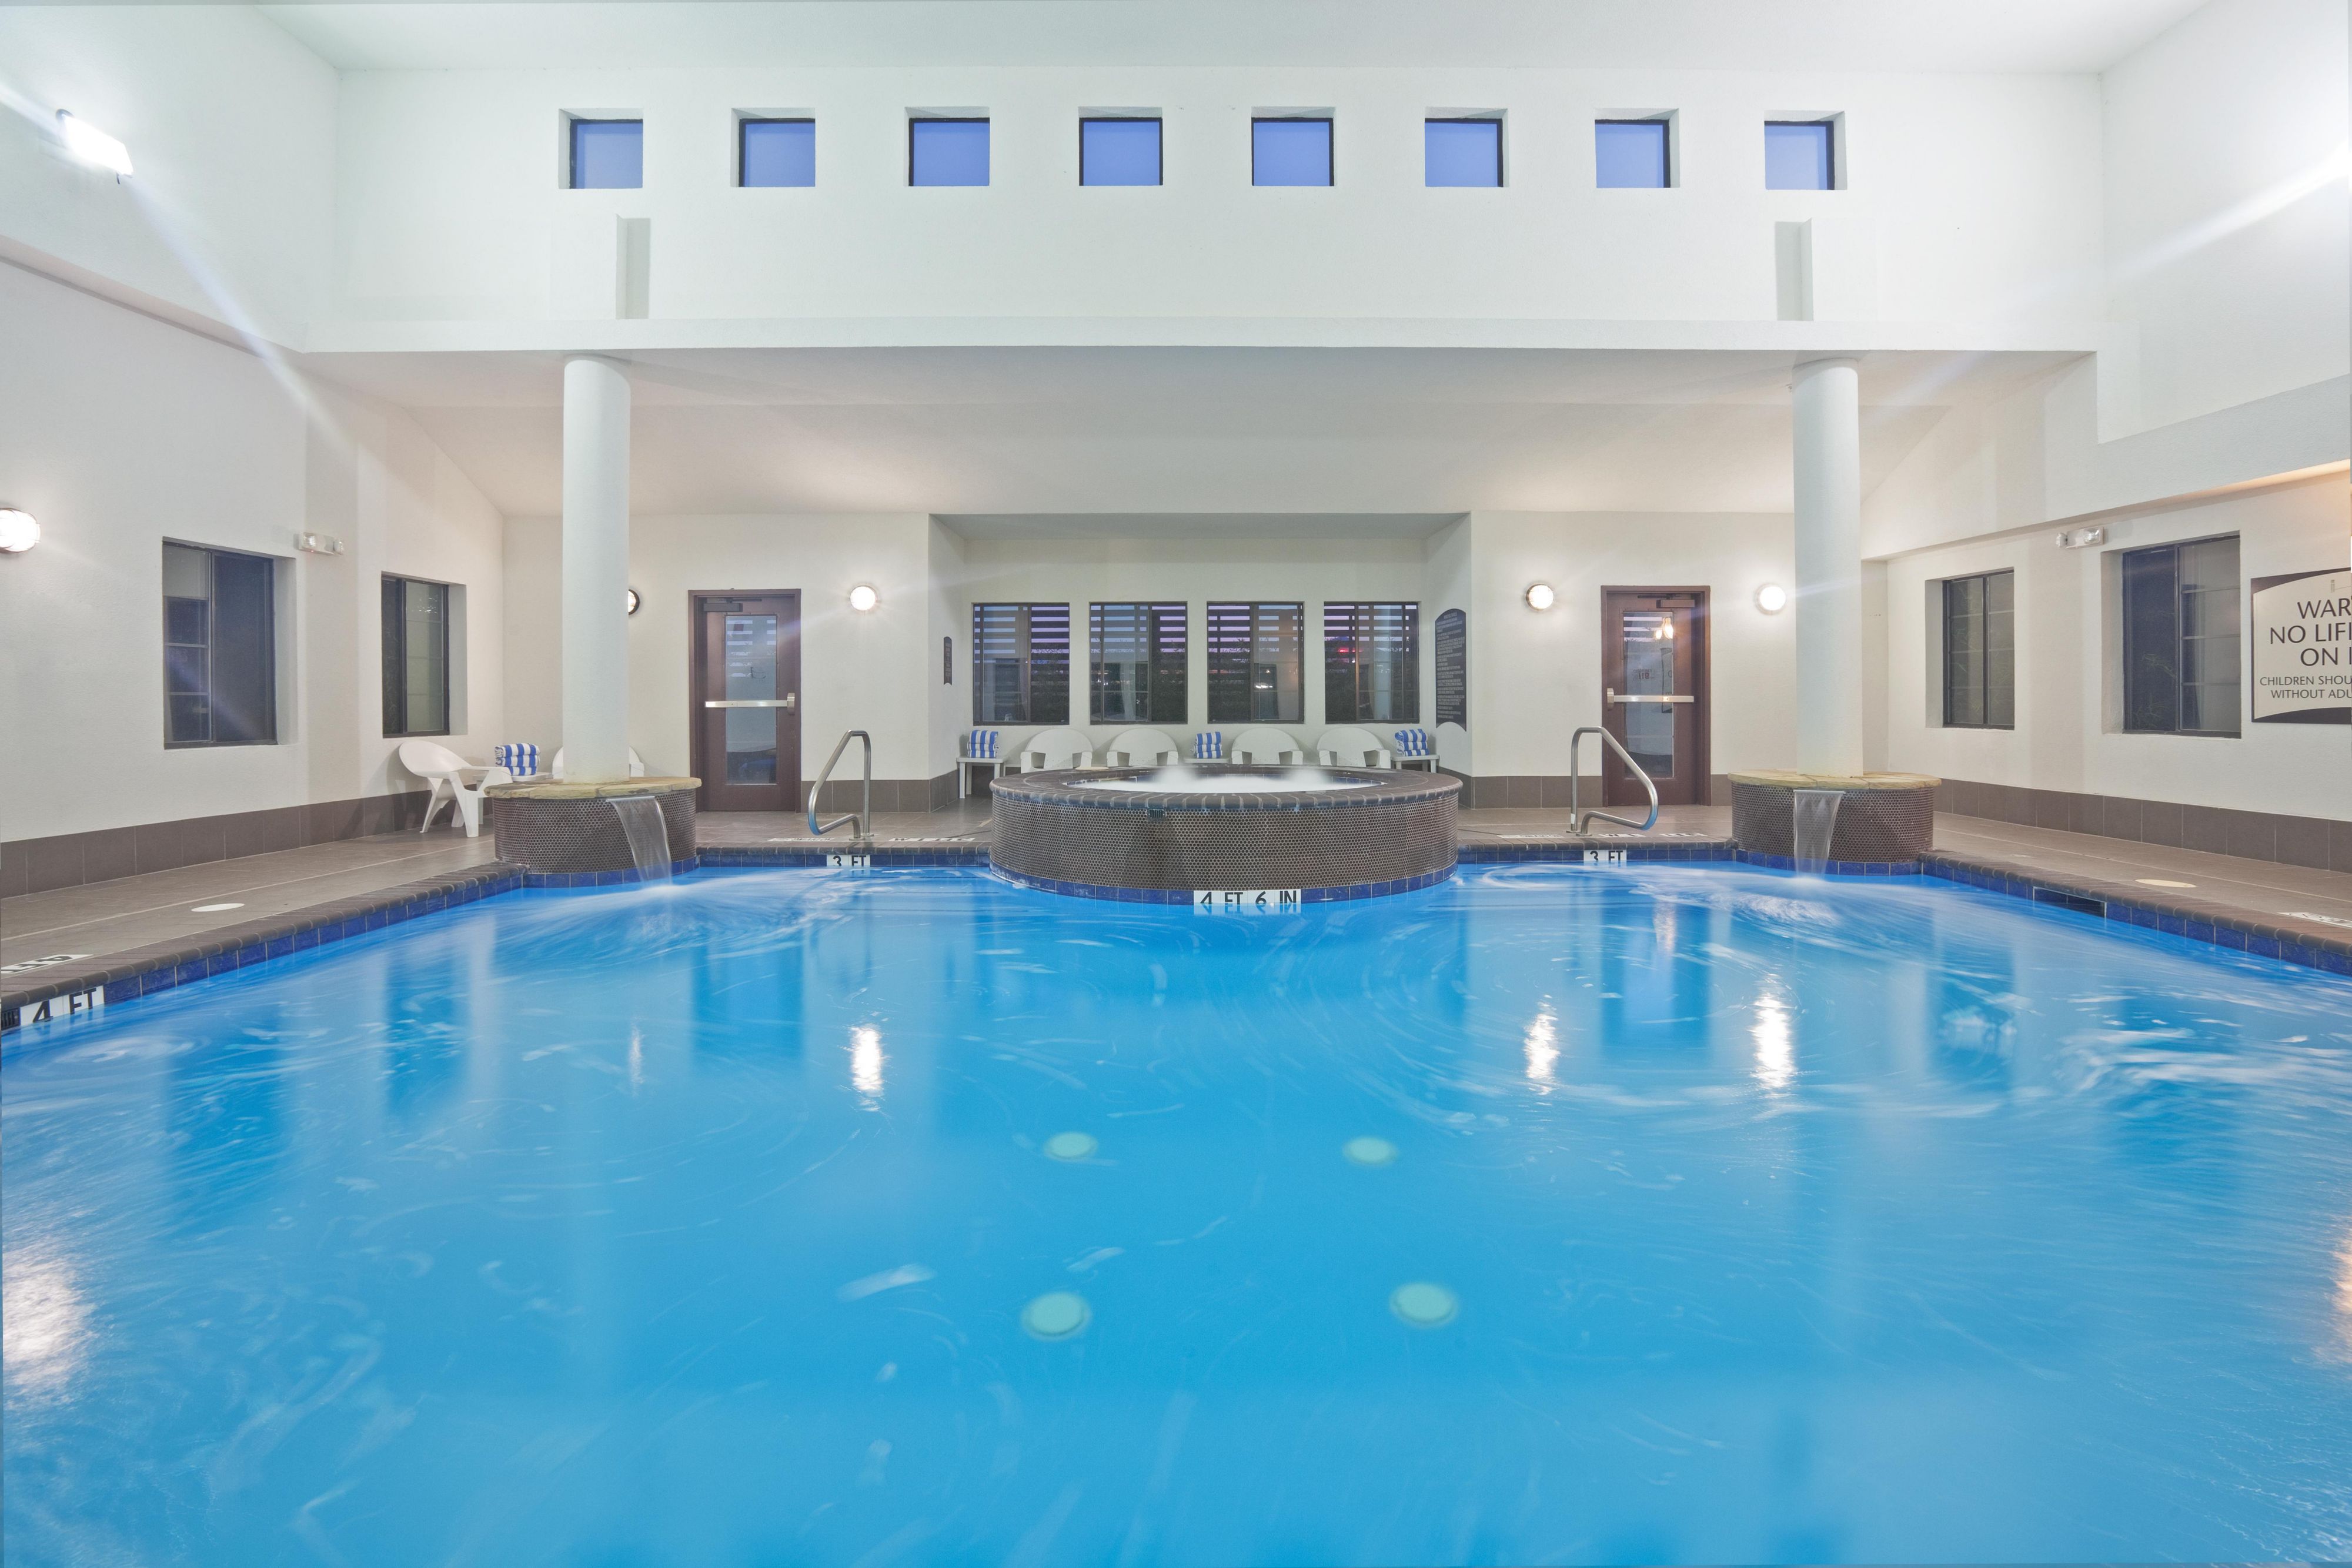 We are happy to offer our indoor pool and hot tub for you to relax in while staying at our hotel.